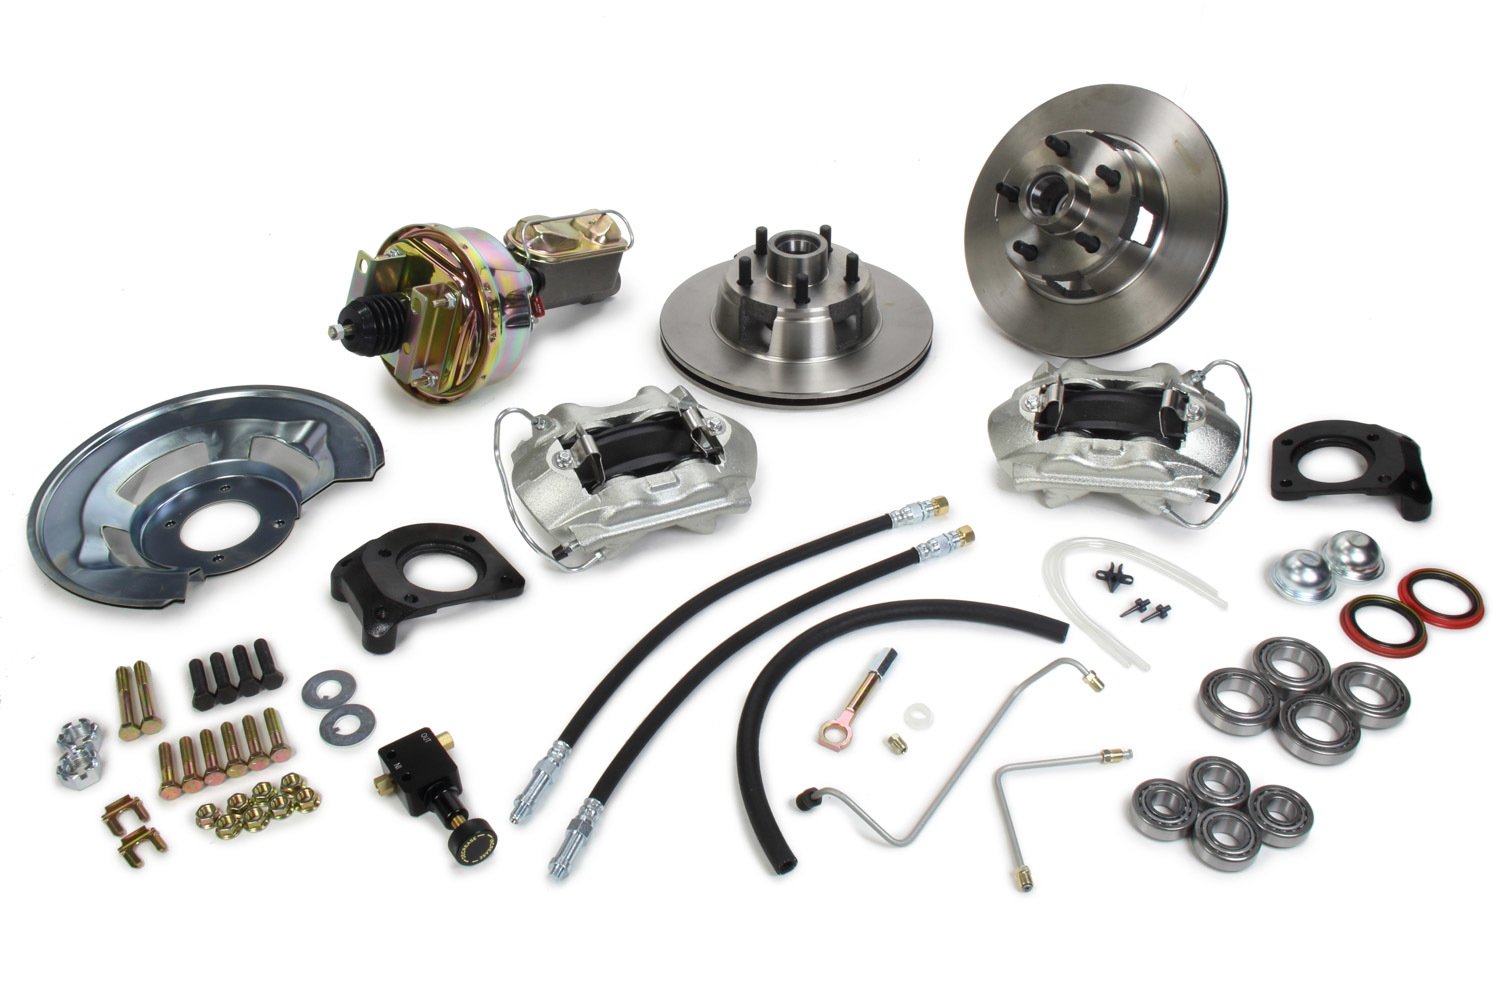 Right Stuff ZDC6405 - Brake System, Street Series, Disc Conversion, Front, 1 Piston Caliper, 11 in Rotors, Offset Hat, Iron, Natural, Ford Mustang 1964-66, Kit